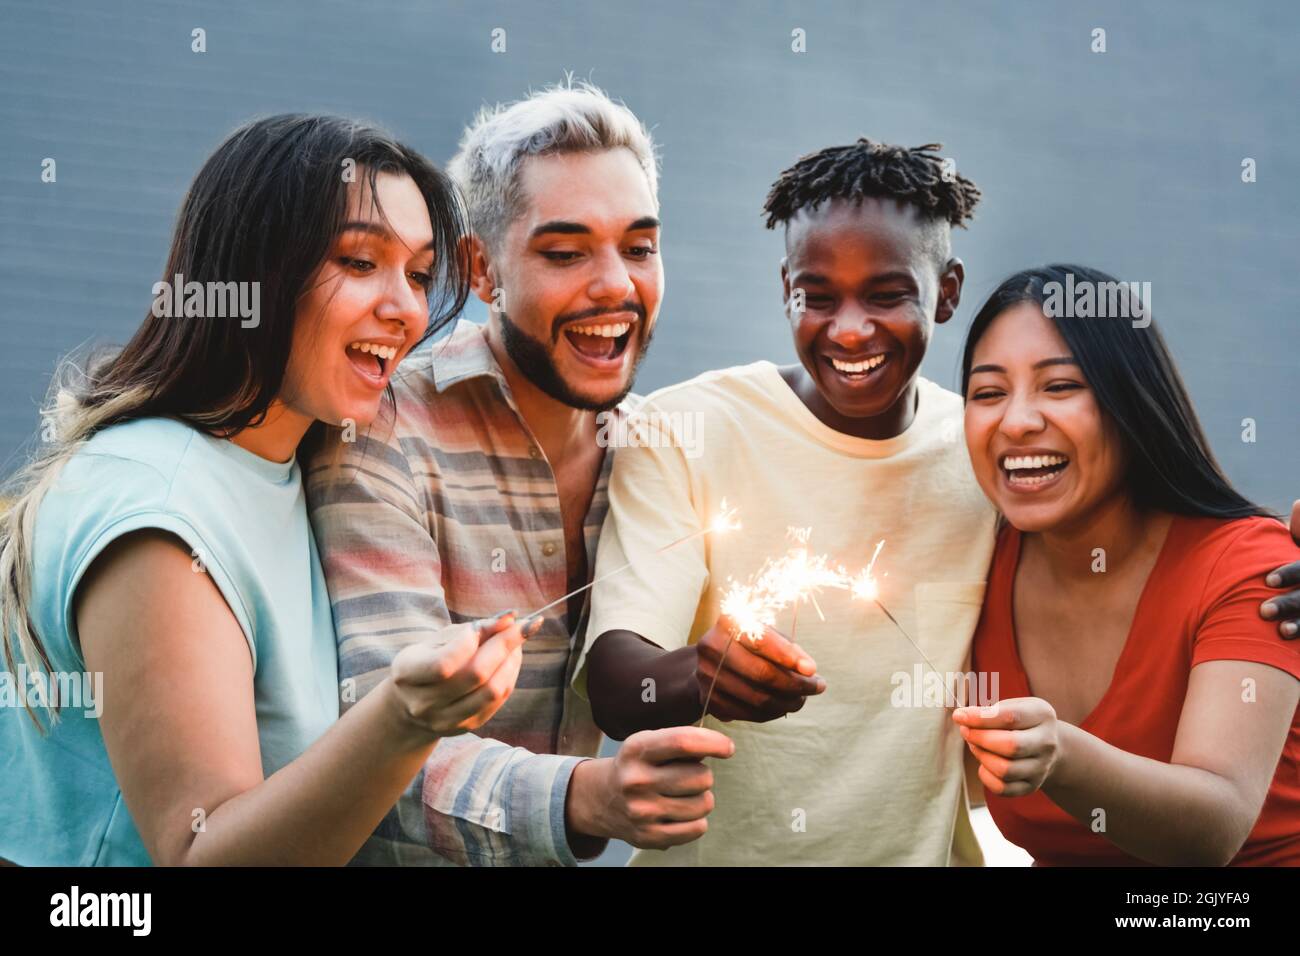 Diverse friends having fun celebrating with fireworks - Focus on right hands holding sparklers Stock Photo